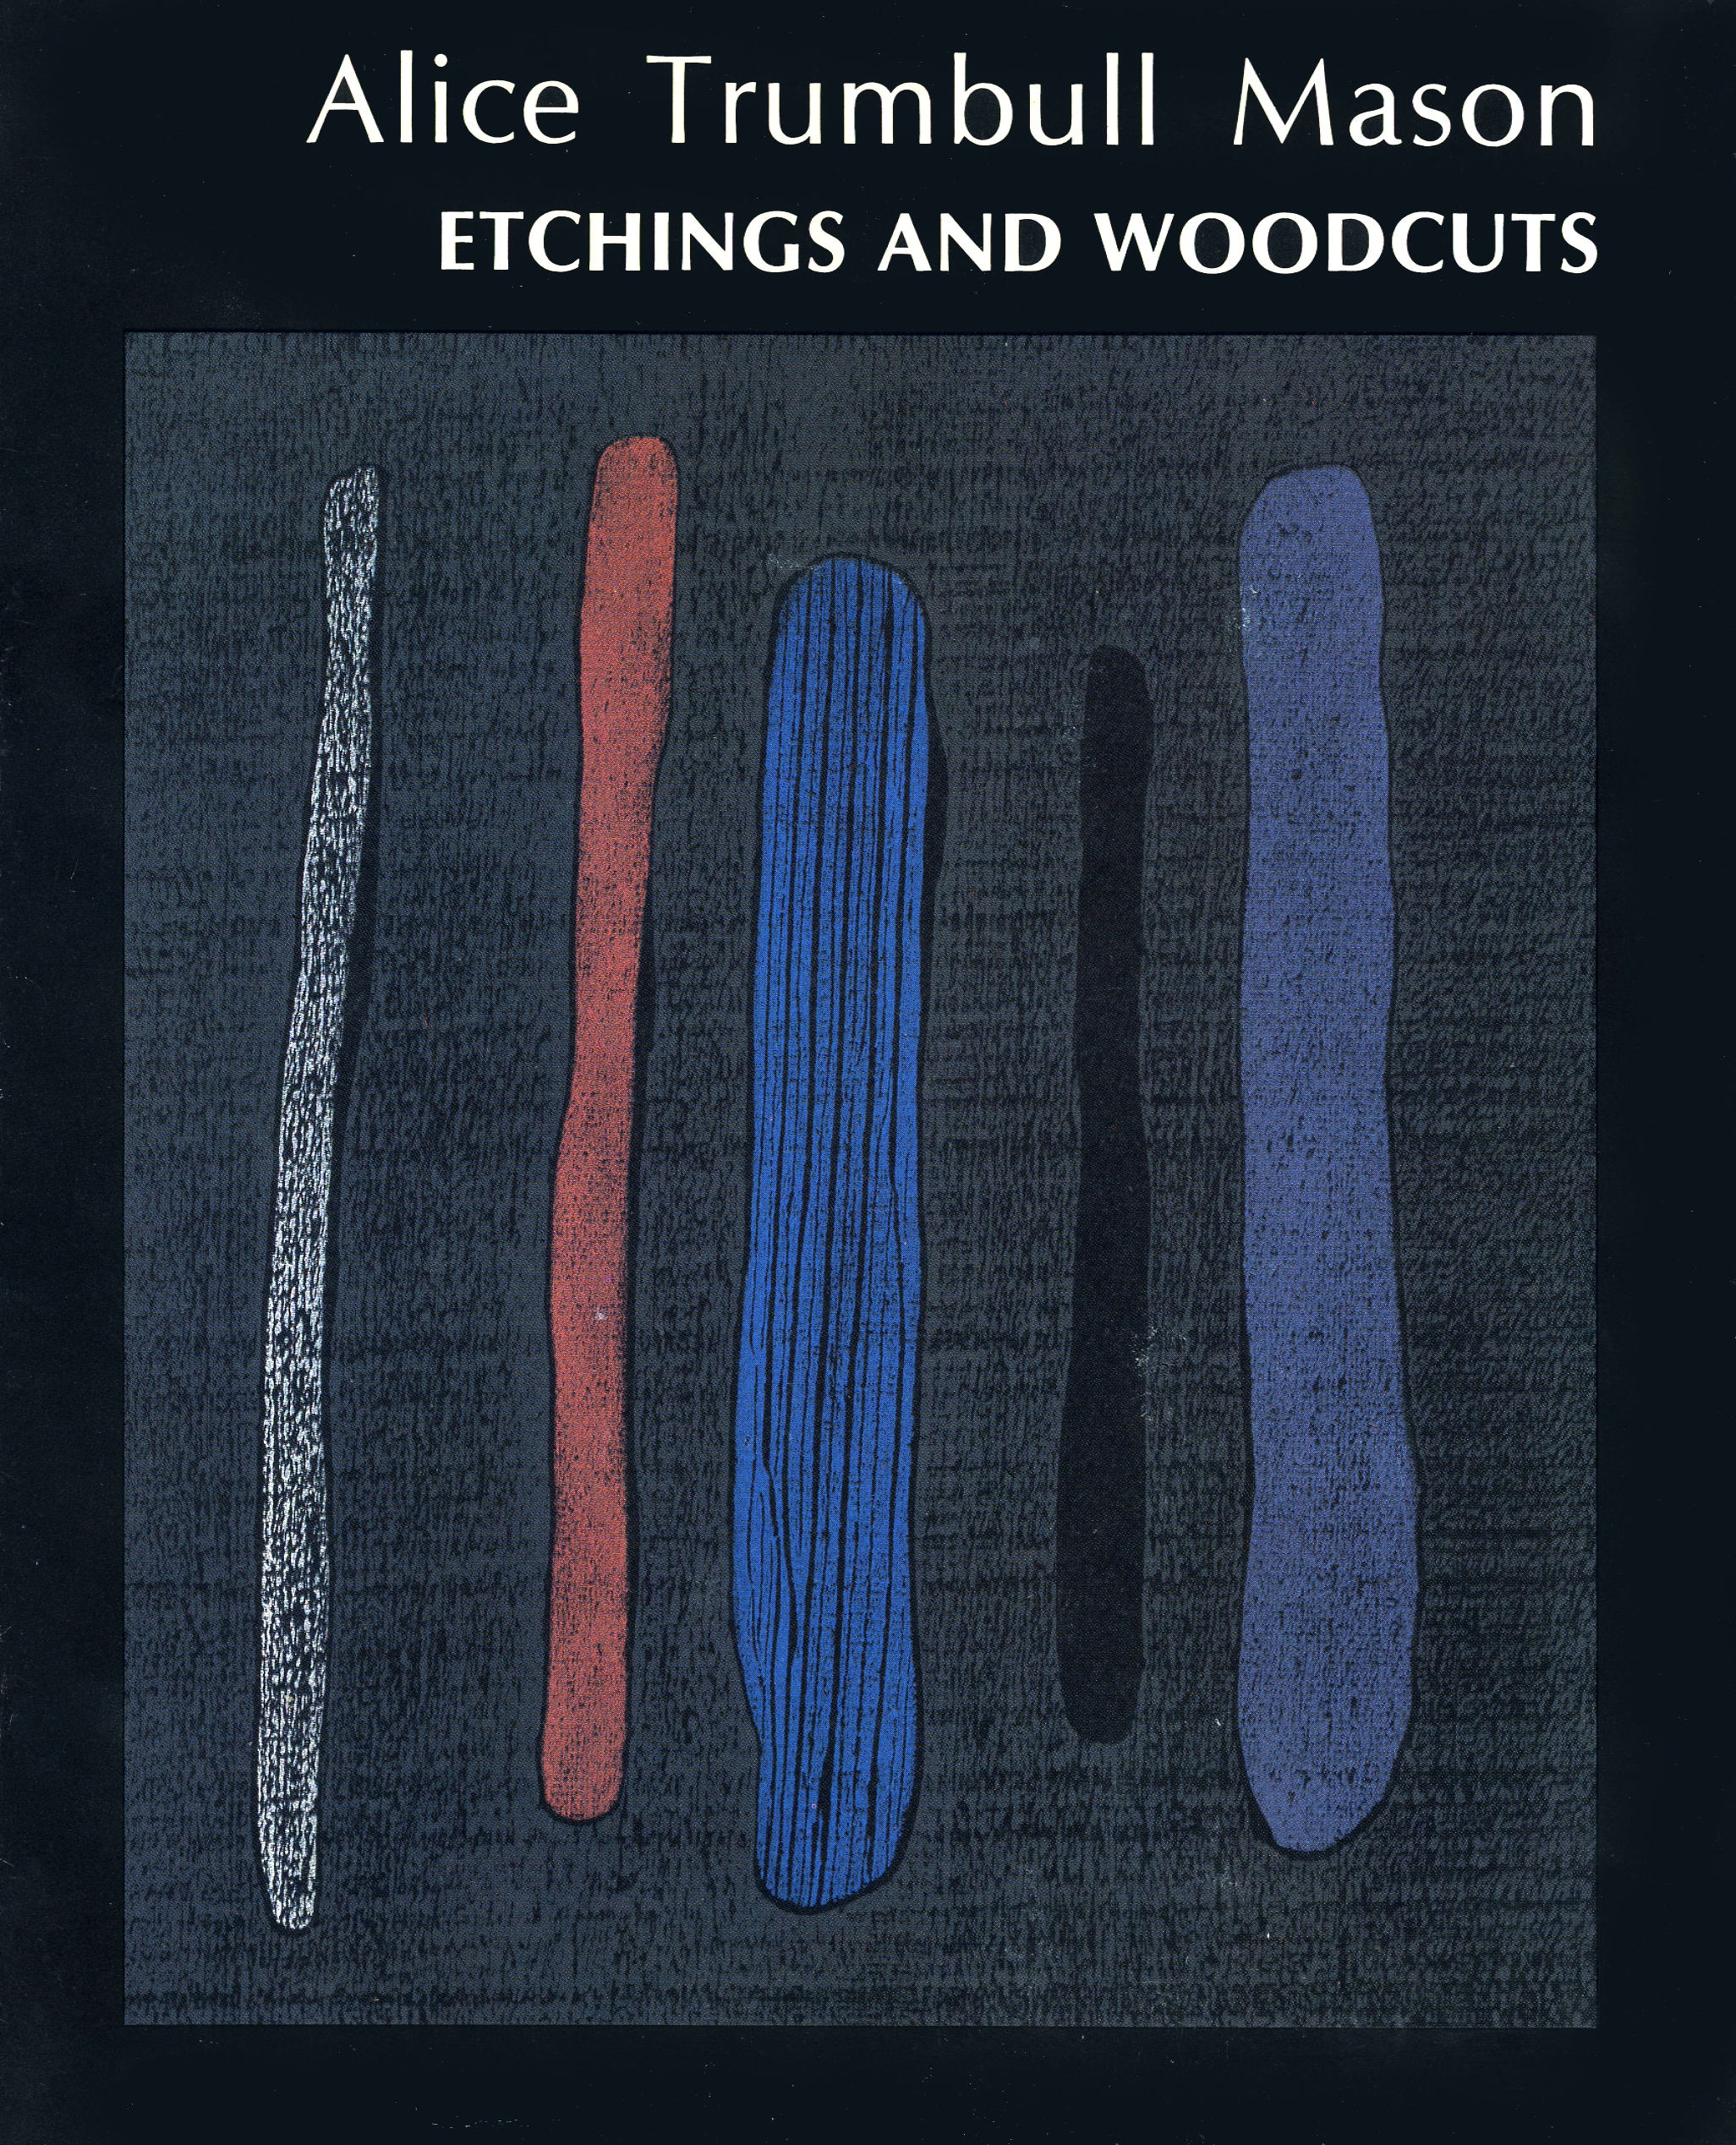 Book cover with an image of an abstract woodblock print of five, thin, oblong vertical forms on a black background. The color of the forms from right to left are white, dark pink, navy blue, black, and a dark periwinkle. White text on a black background at the top reads "Alice Trumbull Mason: Etchings and Woodcuts"